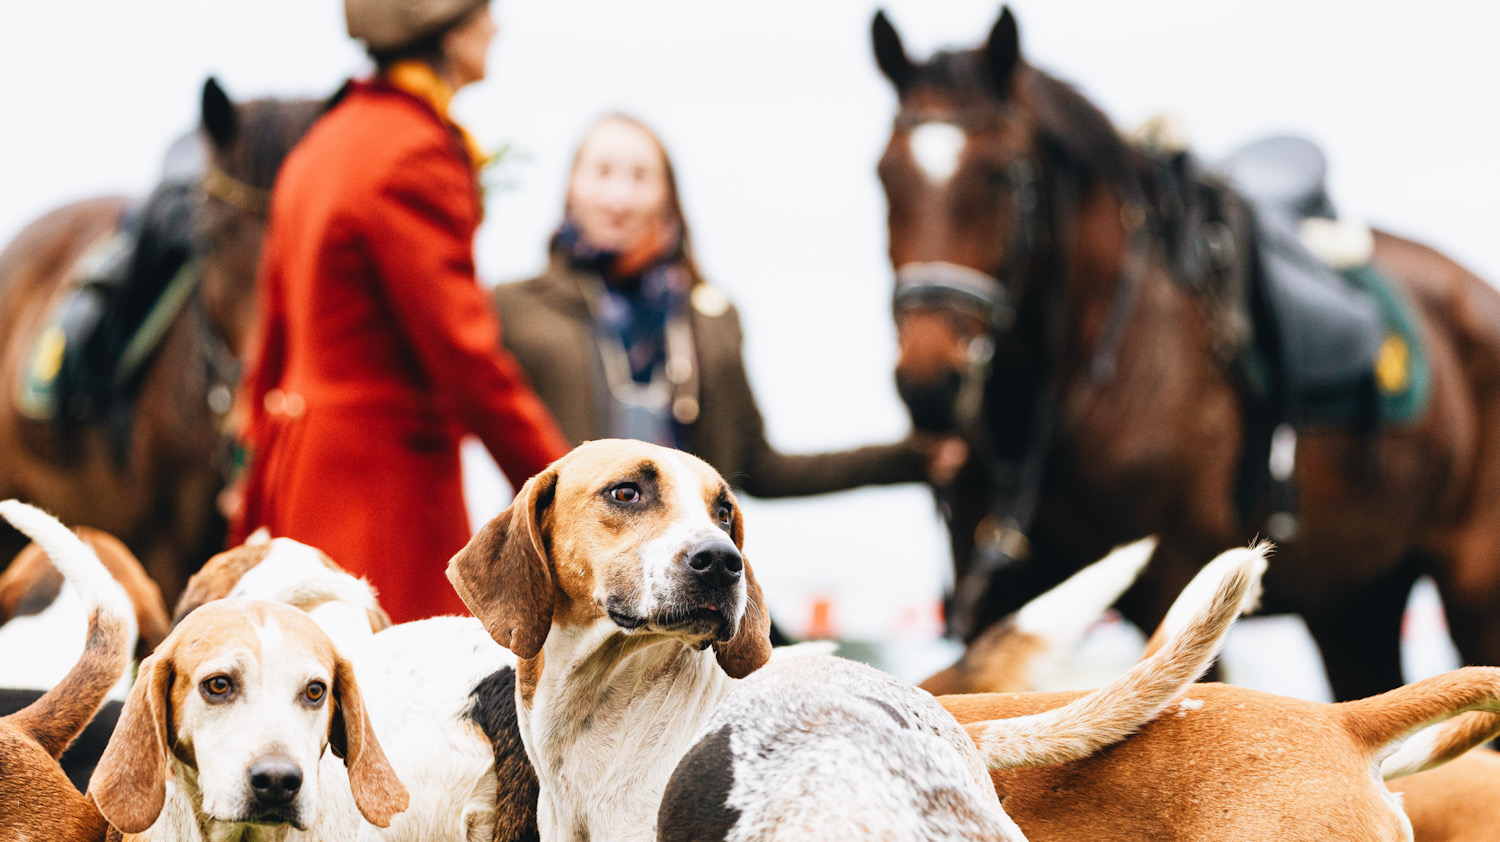 Photo shows English foxhounds in the foreground with two horses and riders in the background, including one member of the hunt wearing a traditional red jacket. The National Trust recently voted to keep its ban on trail hunting.